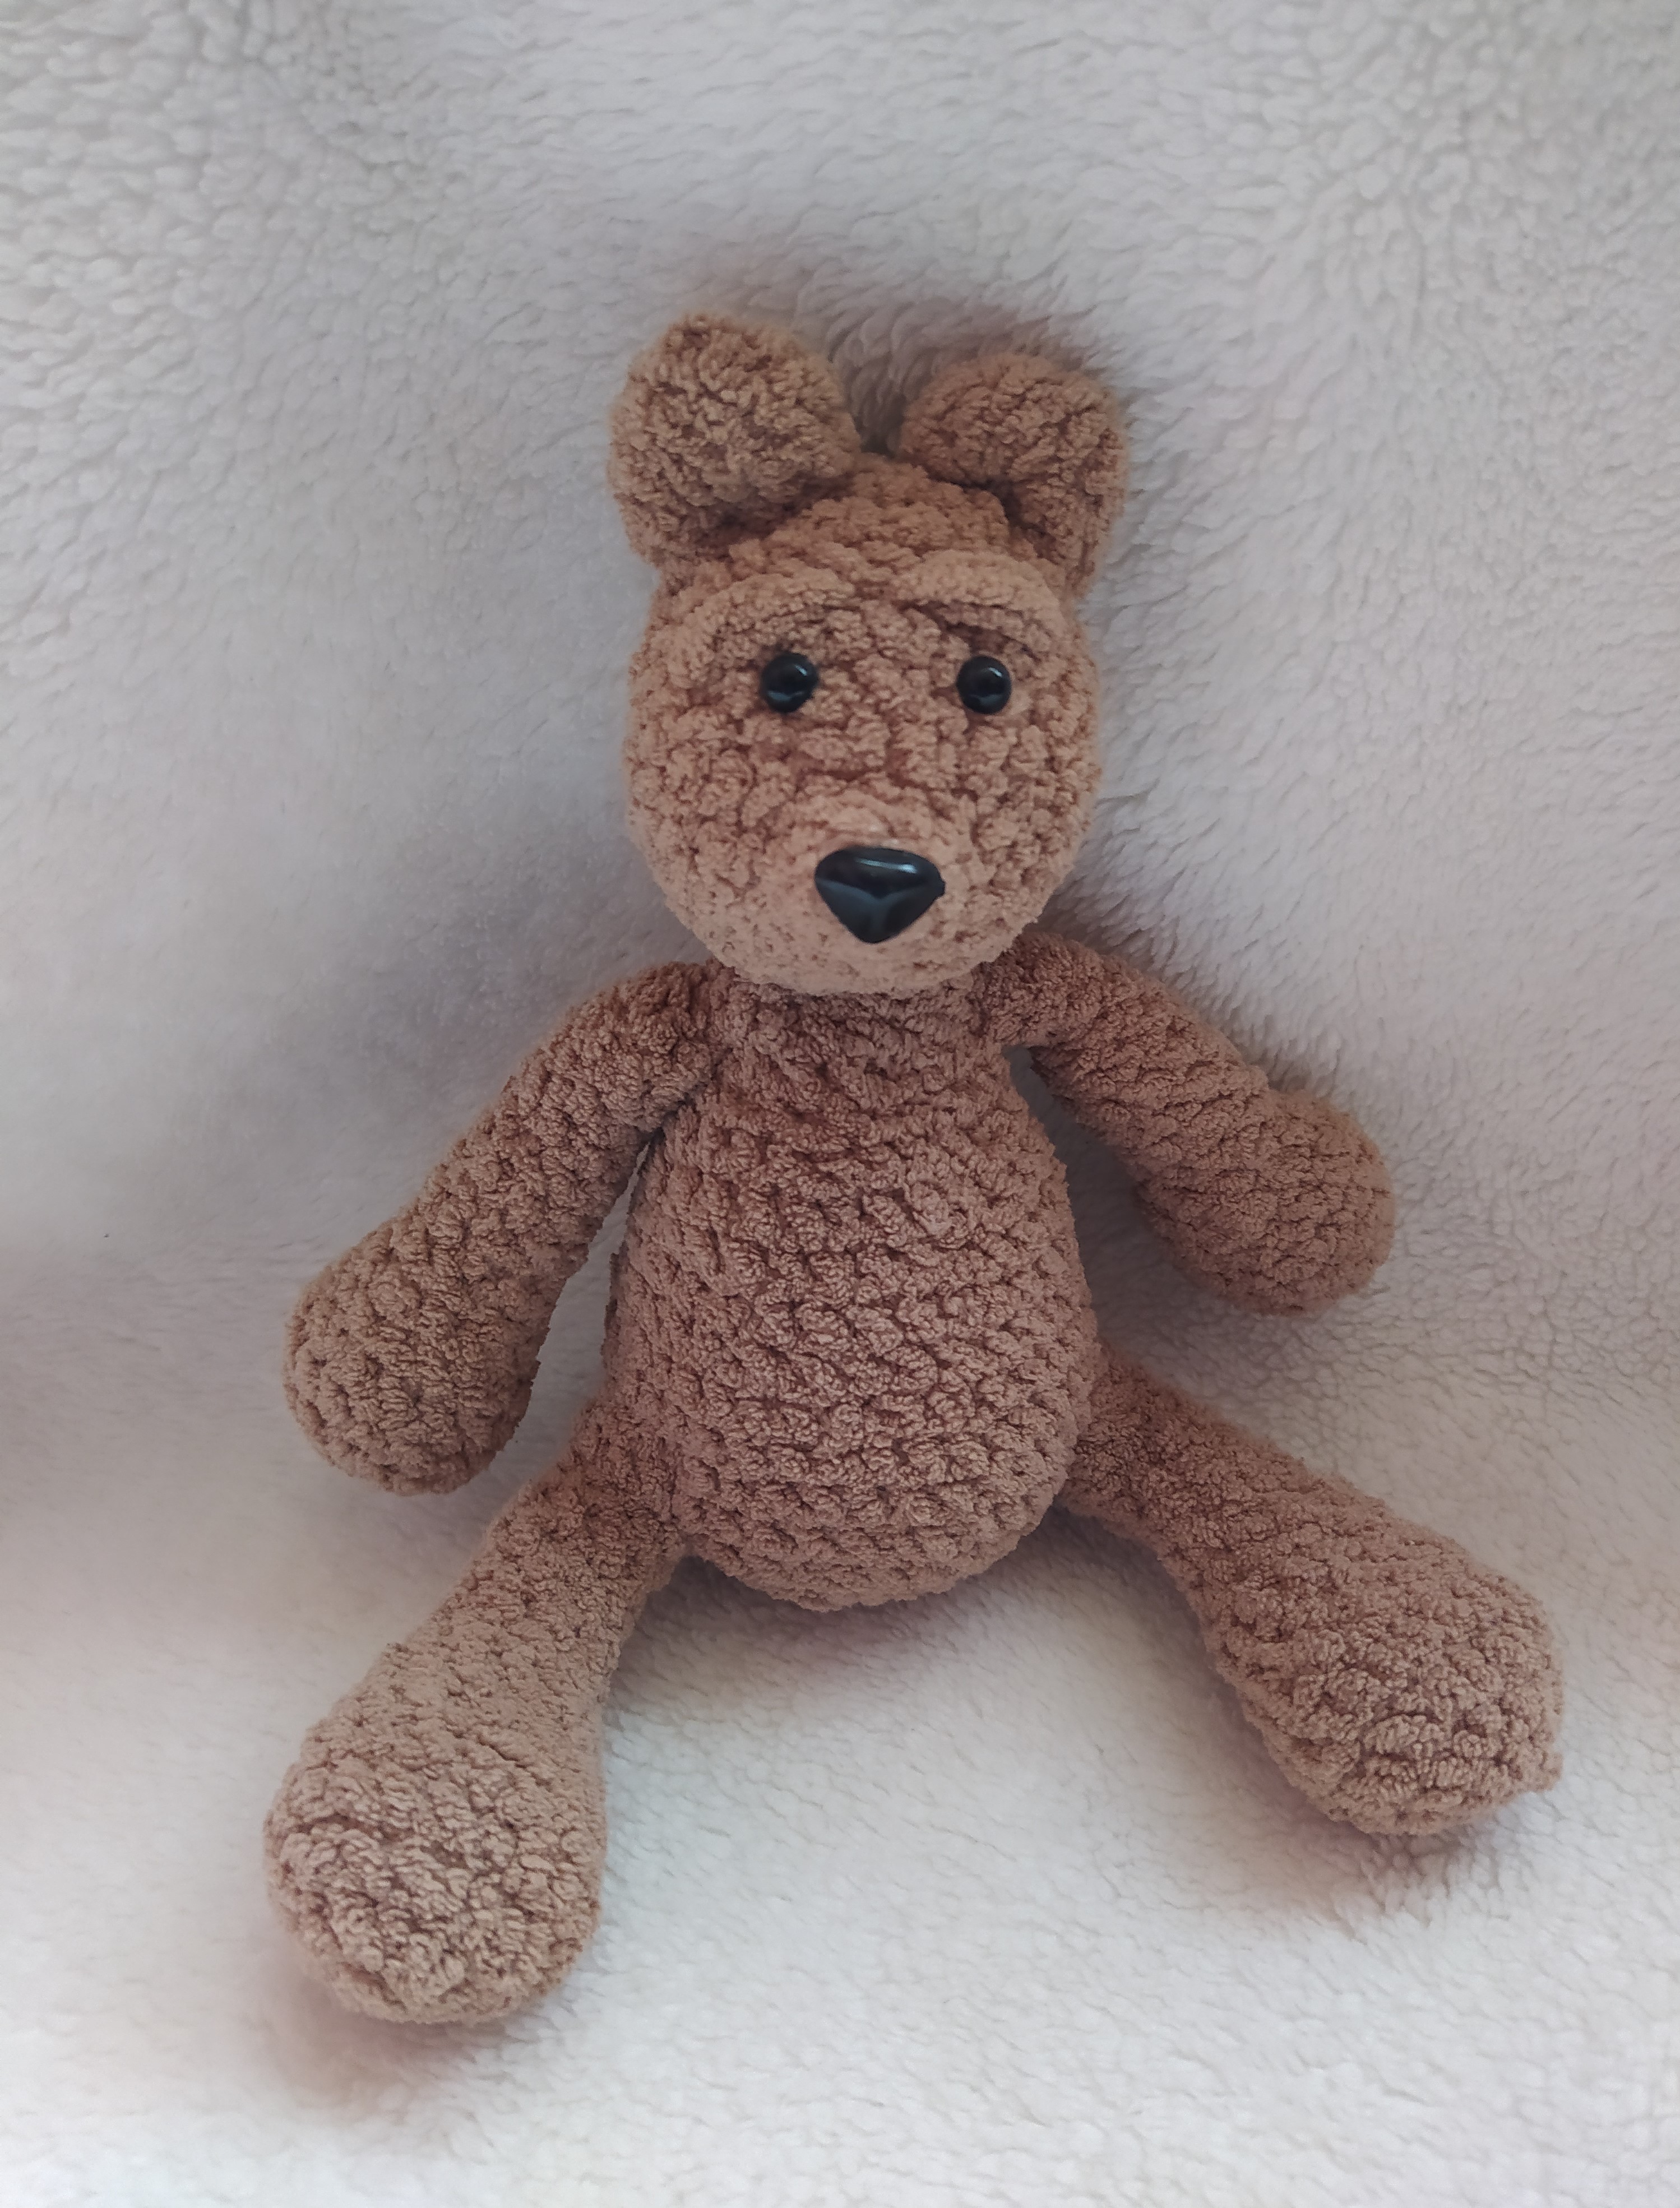 Hand-woven toy bear